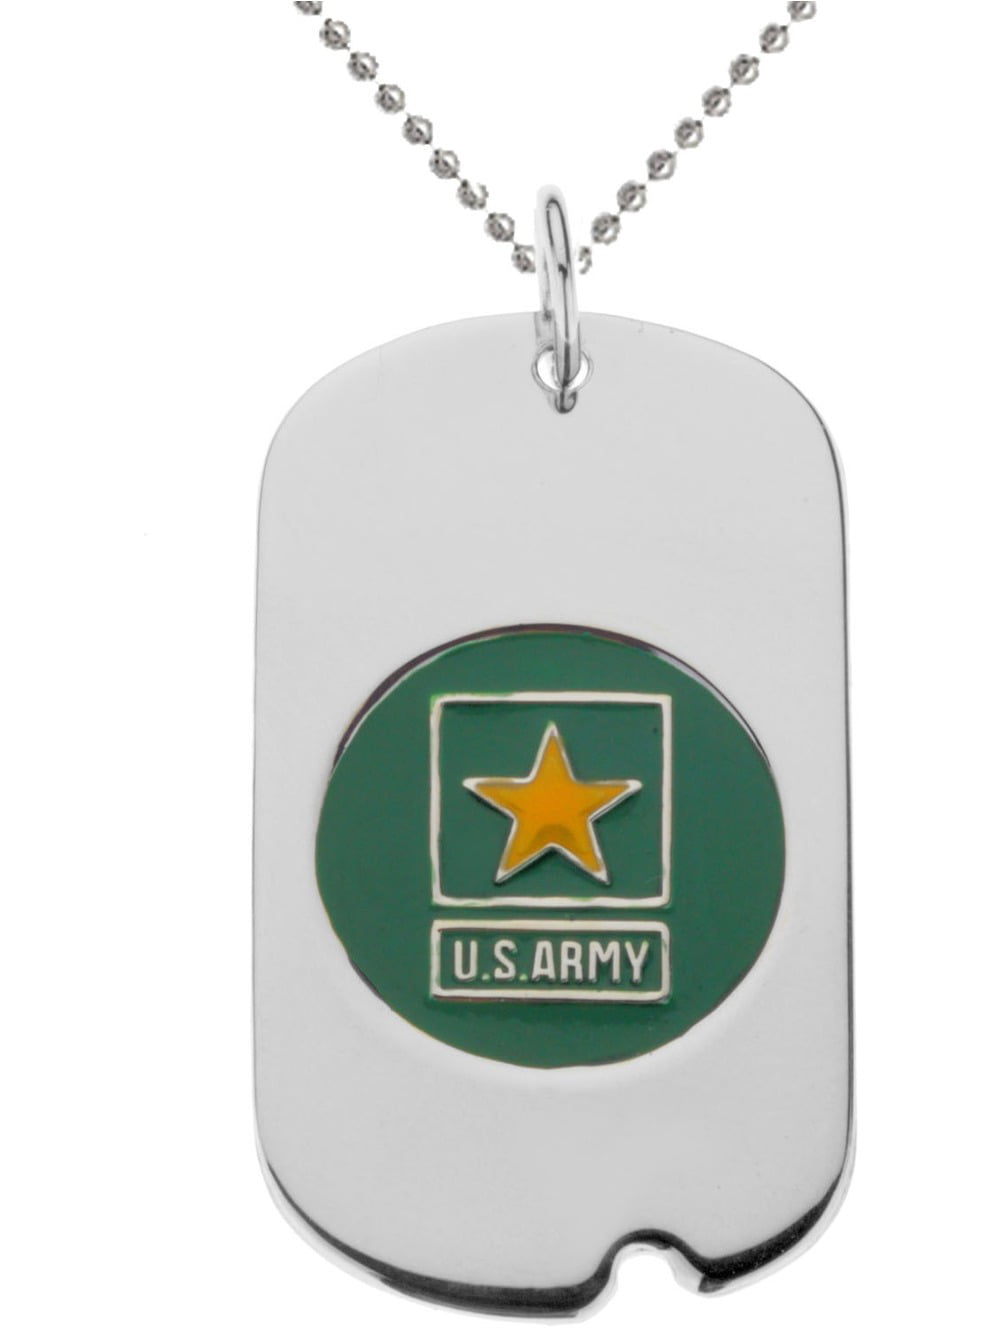 US ARMY Dog Tag Pendant Necklace in Sterling Silver with Chain ...